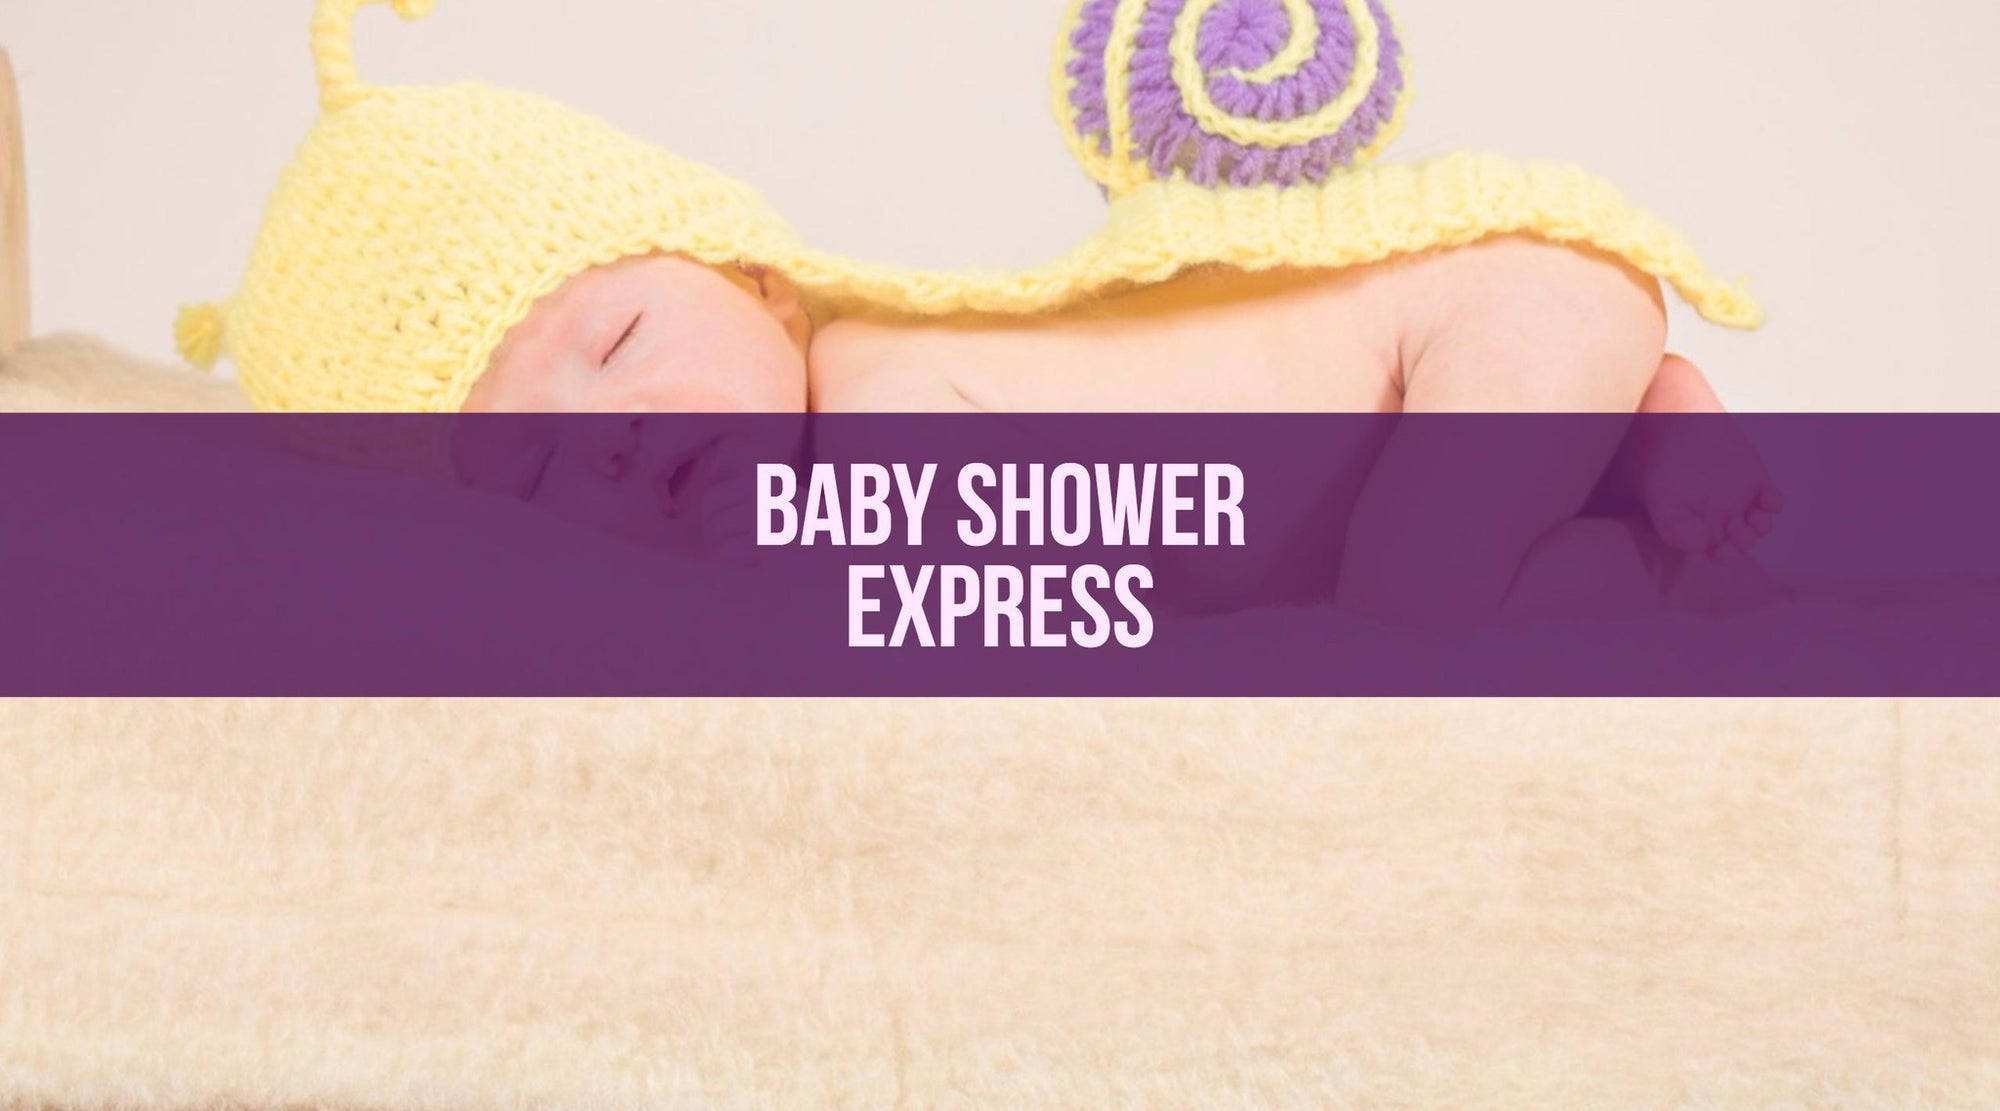 Baby Shower Express: 3 Basic Elements to Focus On